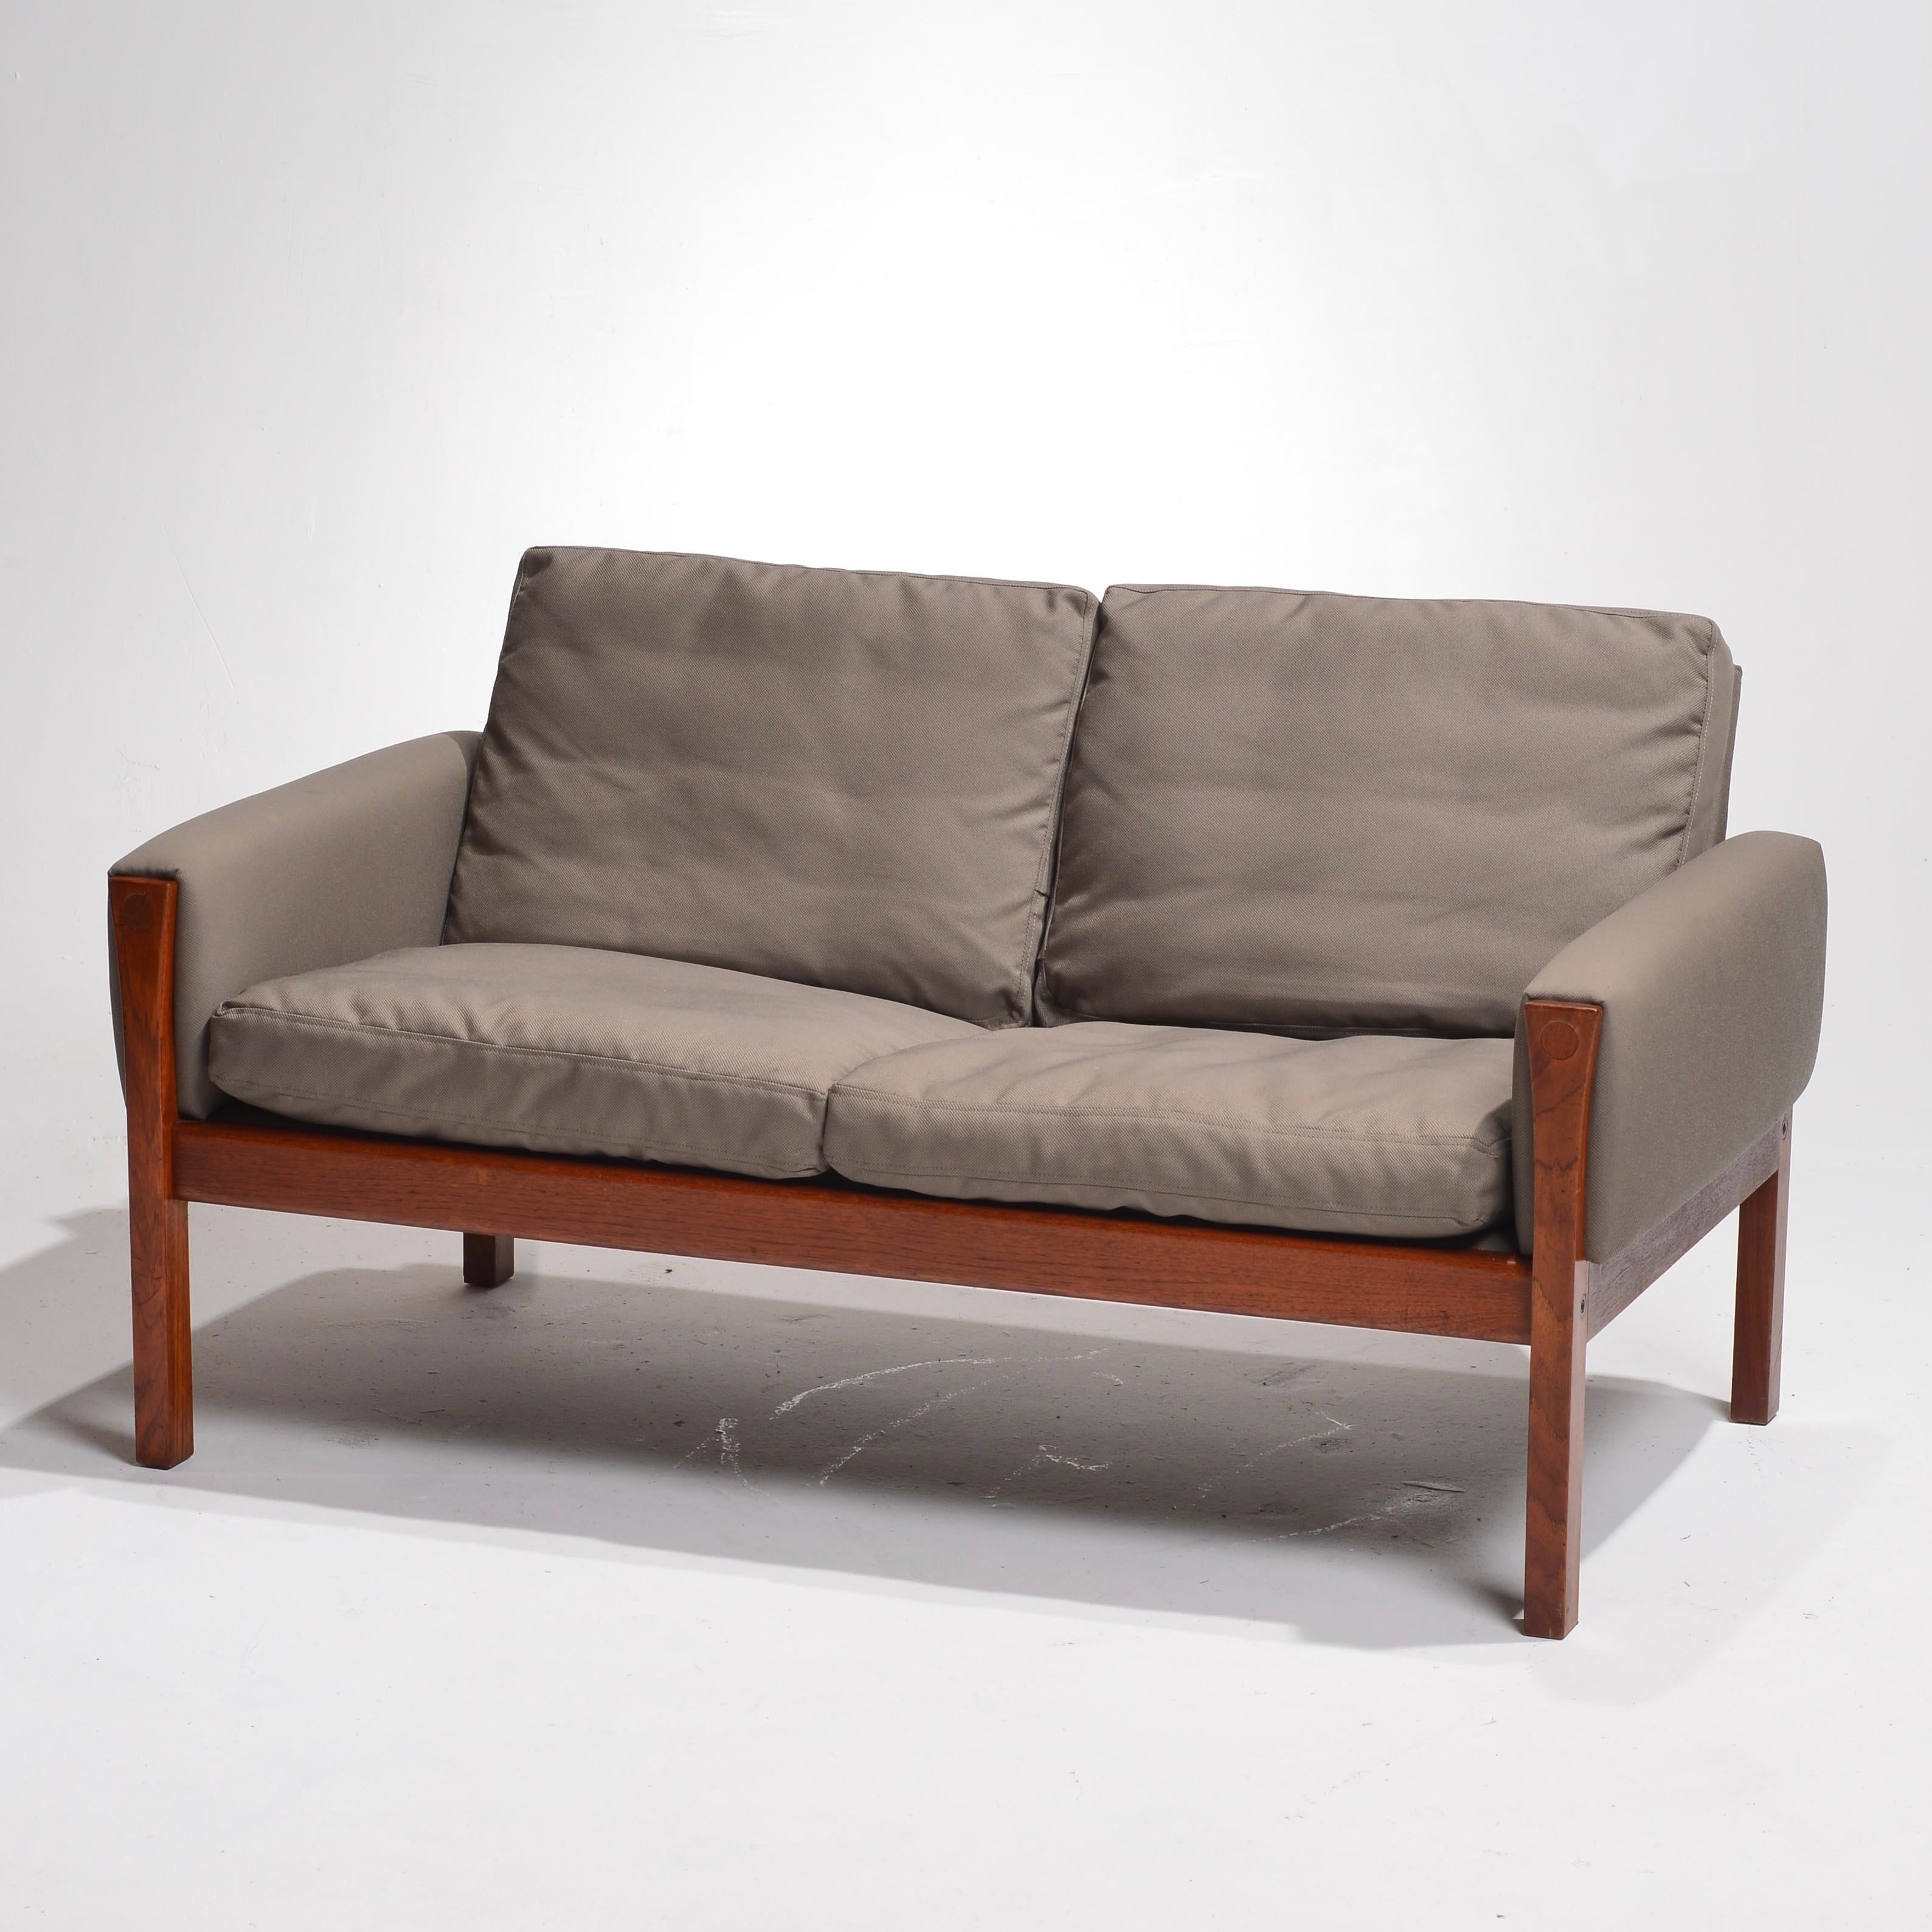 Introducing the Hans Wegner/Arne Poulsen loveseat, Model AP62! 

The Hans Wegner/Arne Poulsen Loveseat, Model AP62, is a true masterpiece that embodies the visionary designs of two legendary Danish designers, Hans Wegner and Arne Poulsen. This